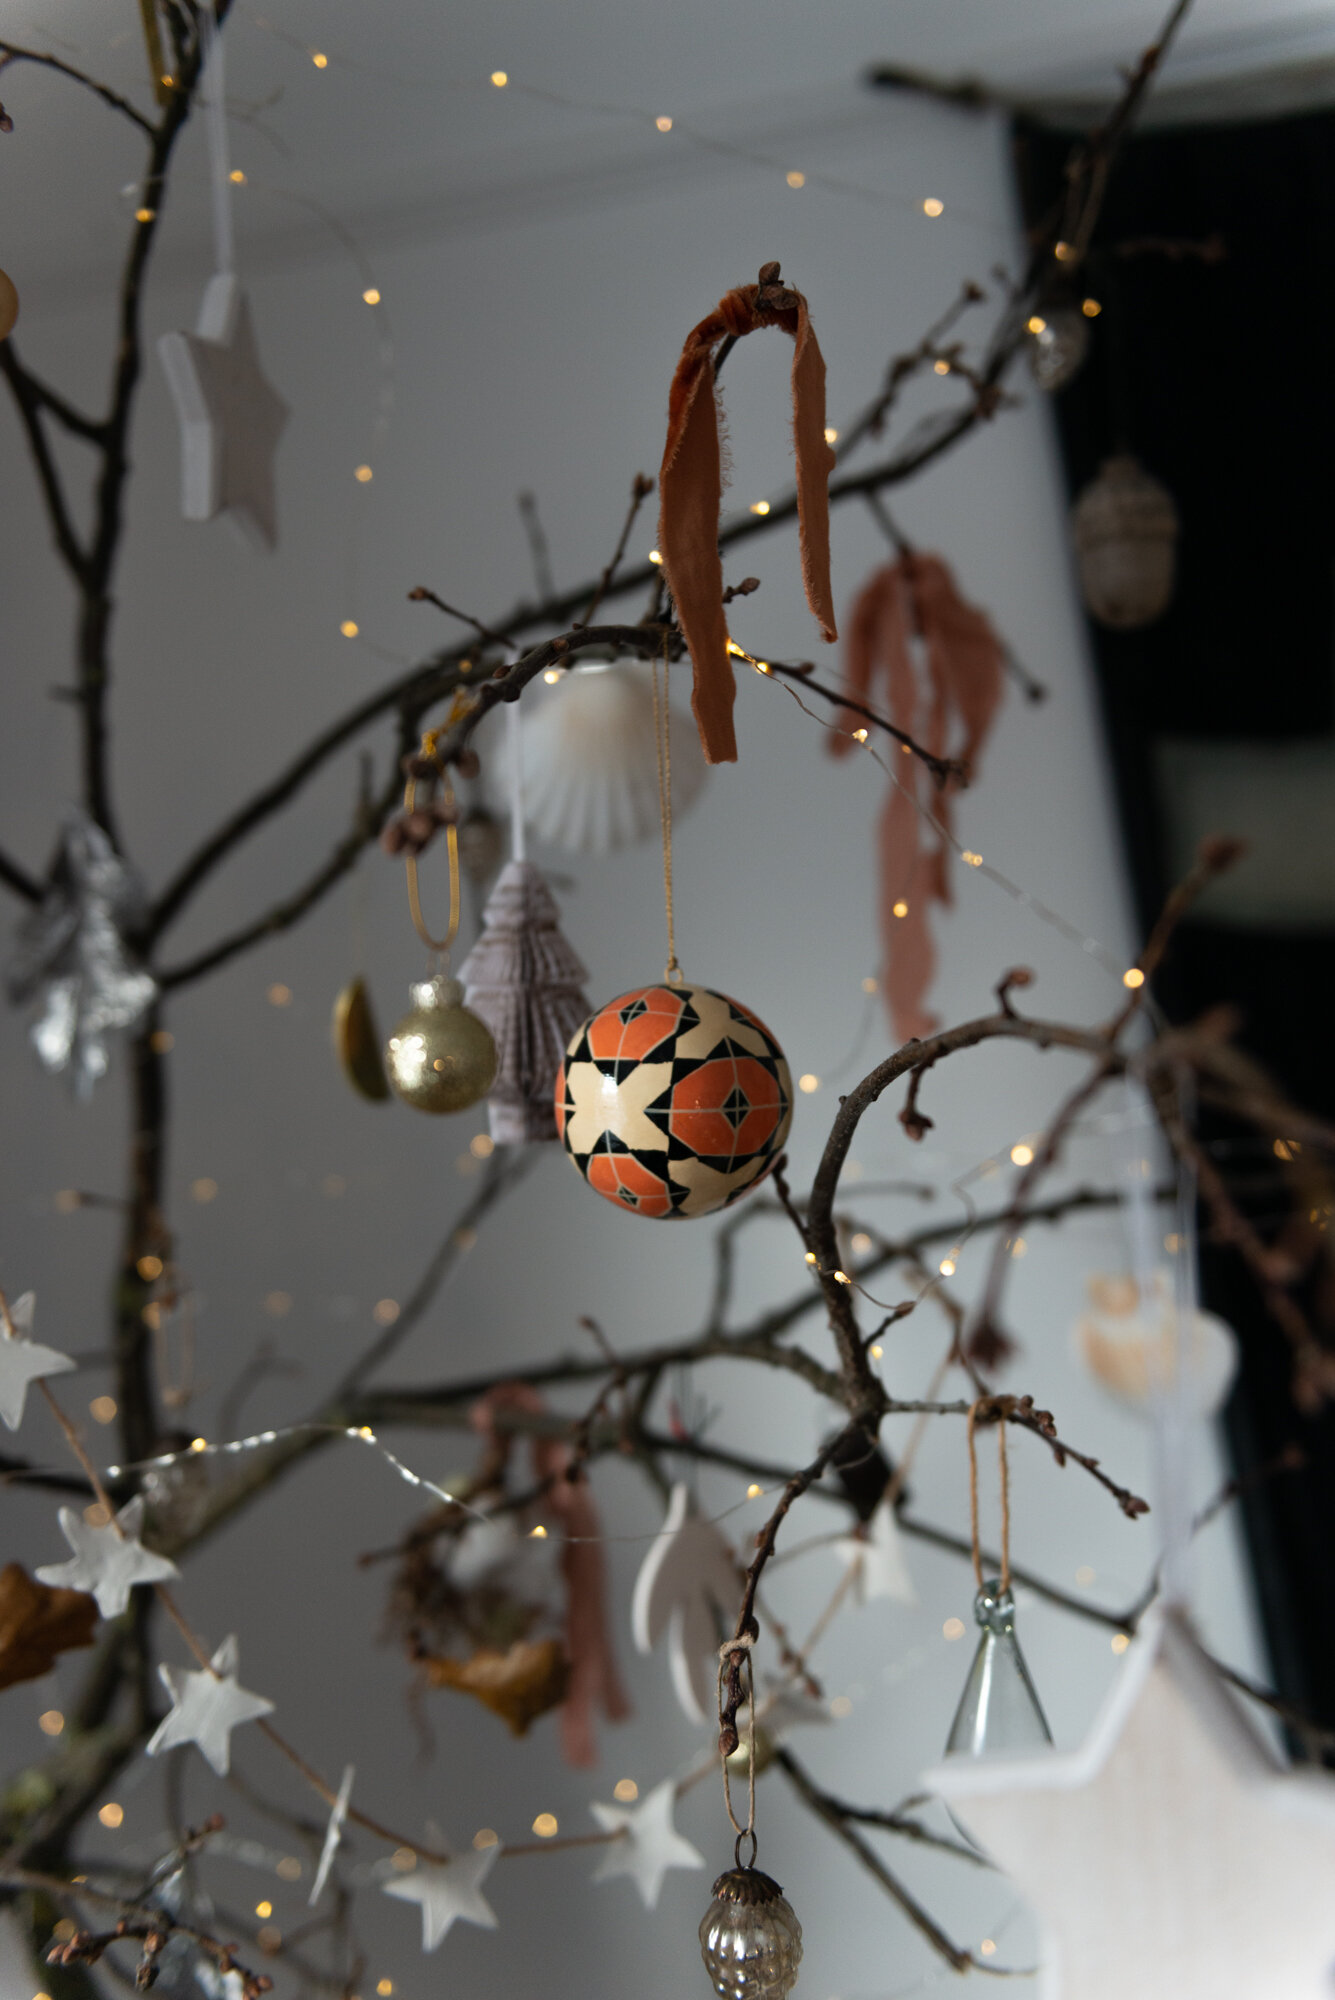  Our Christmas branch! An alternative eco-friendly zero-cost Christmas tree idea. The orange and white Toast baubles are made from recycled paper. Ribbon is by The Natural Dye Works. The brass moon decoratins are by Workshop ltd.  